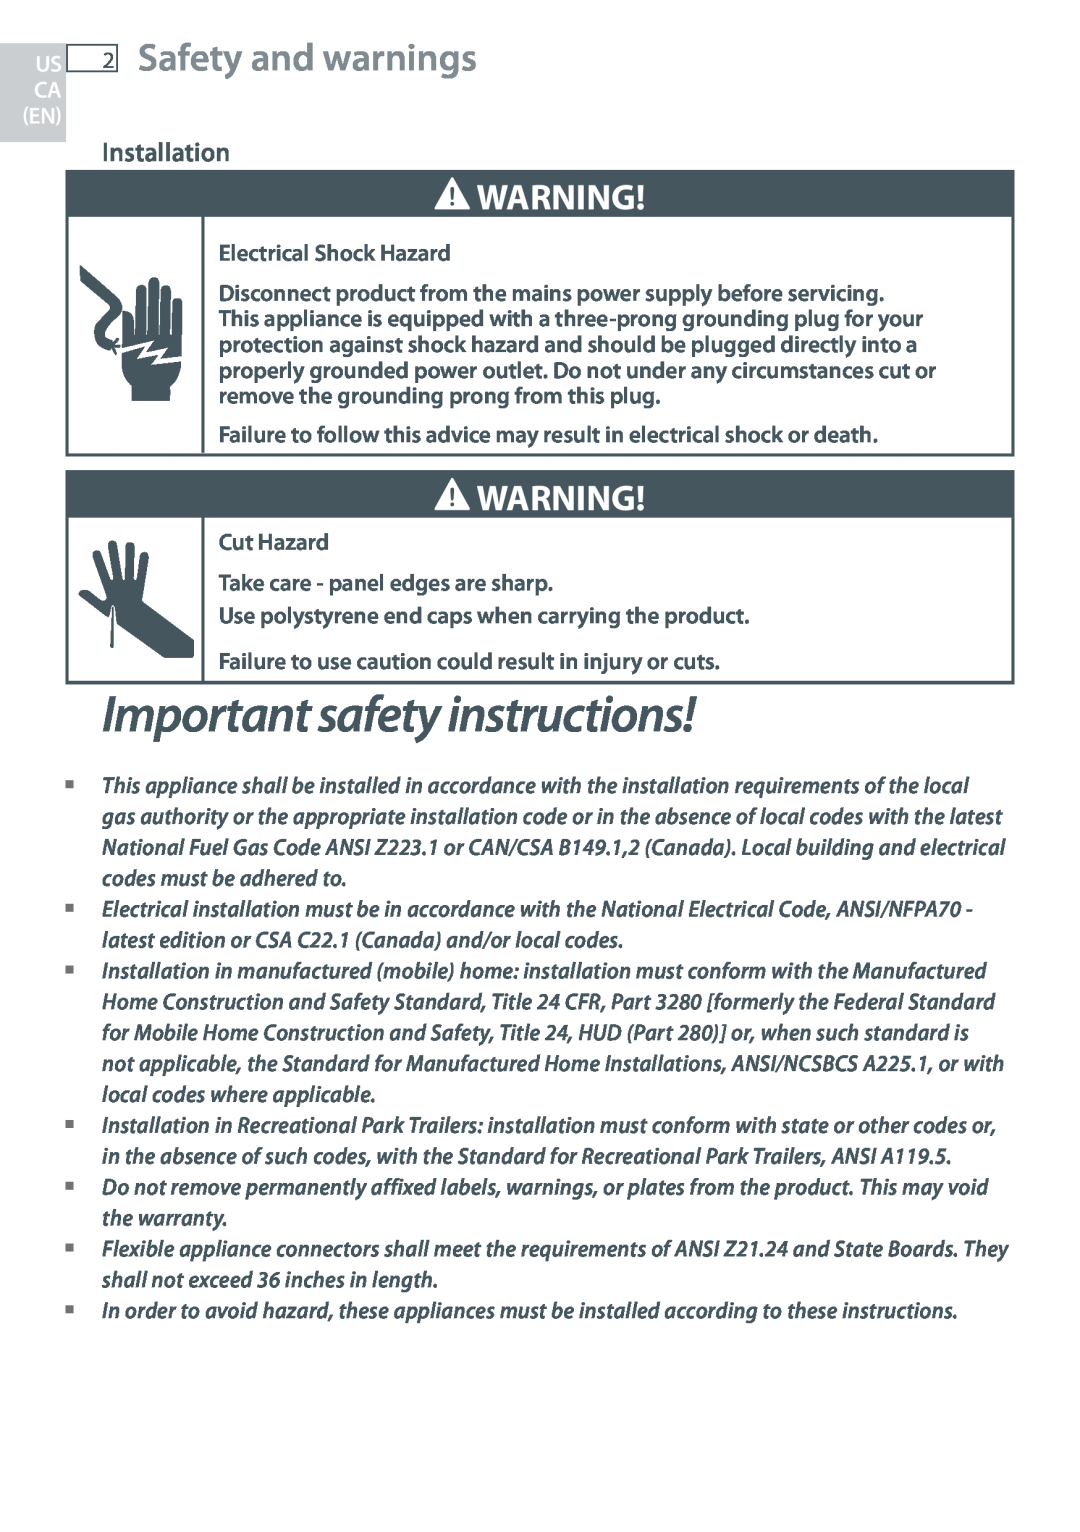 Fisher & Paykel CG365D, CG365C Important safety instructions, 2Safety and warnings, Installation, Electrical Shock Hazard 